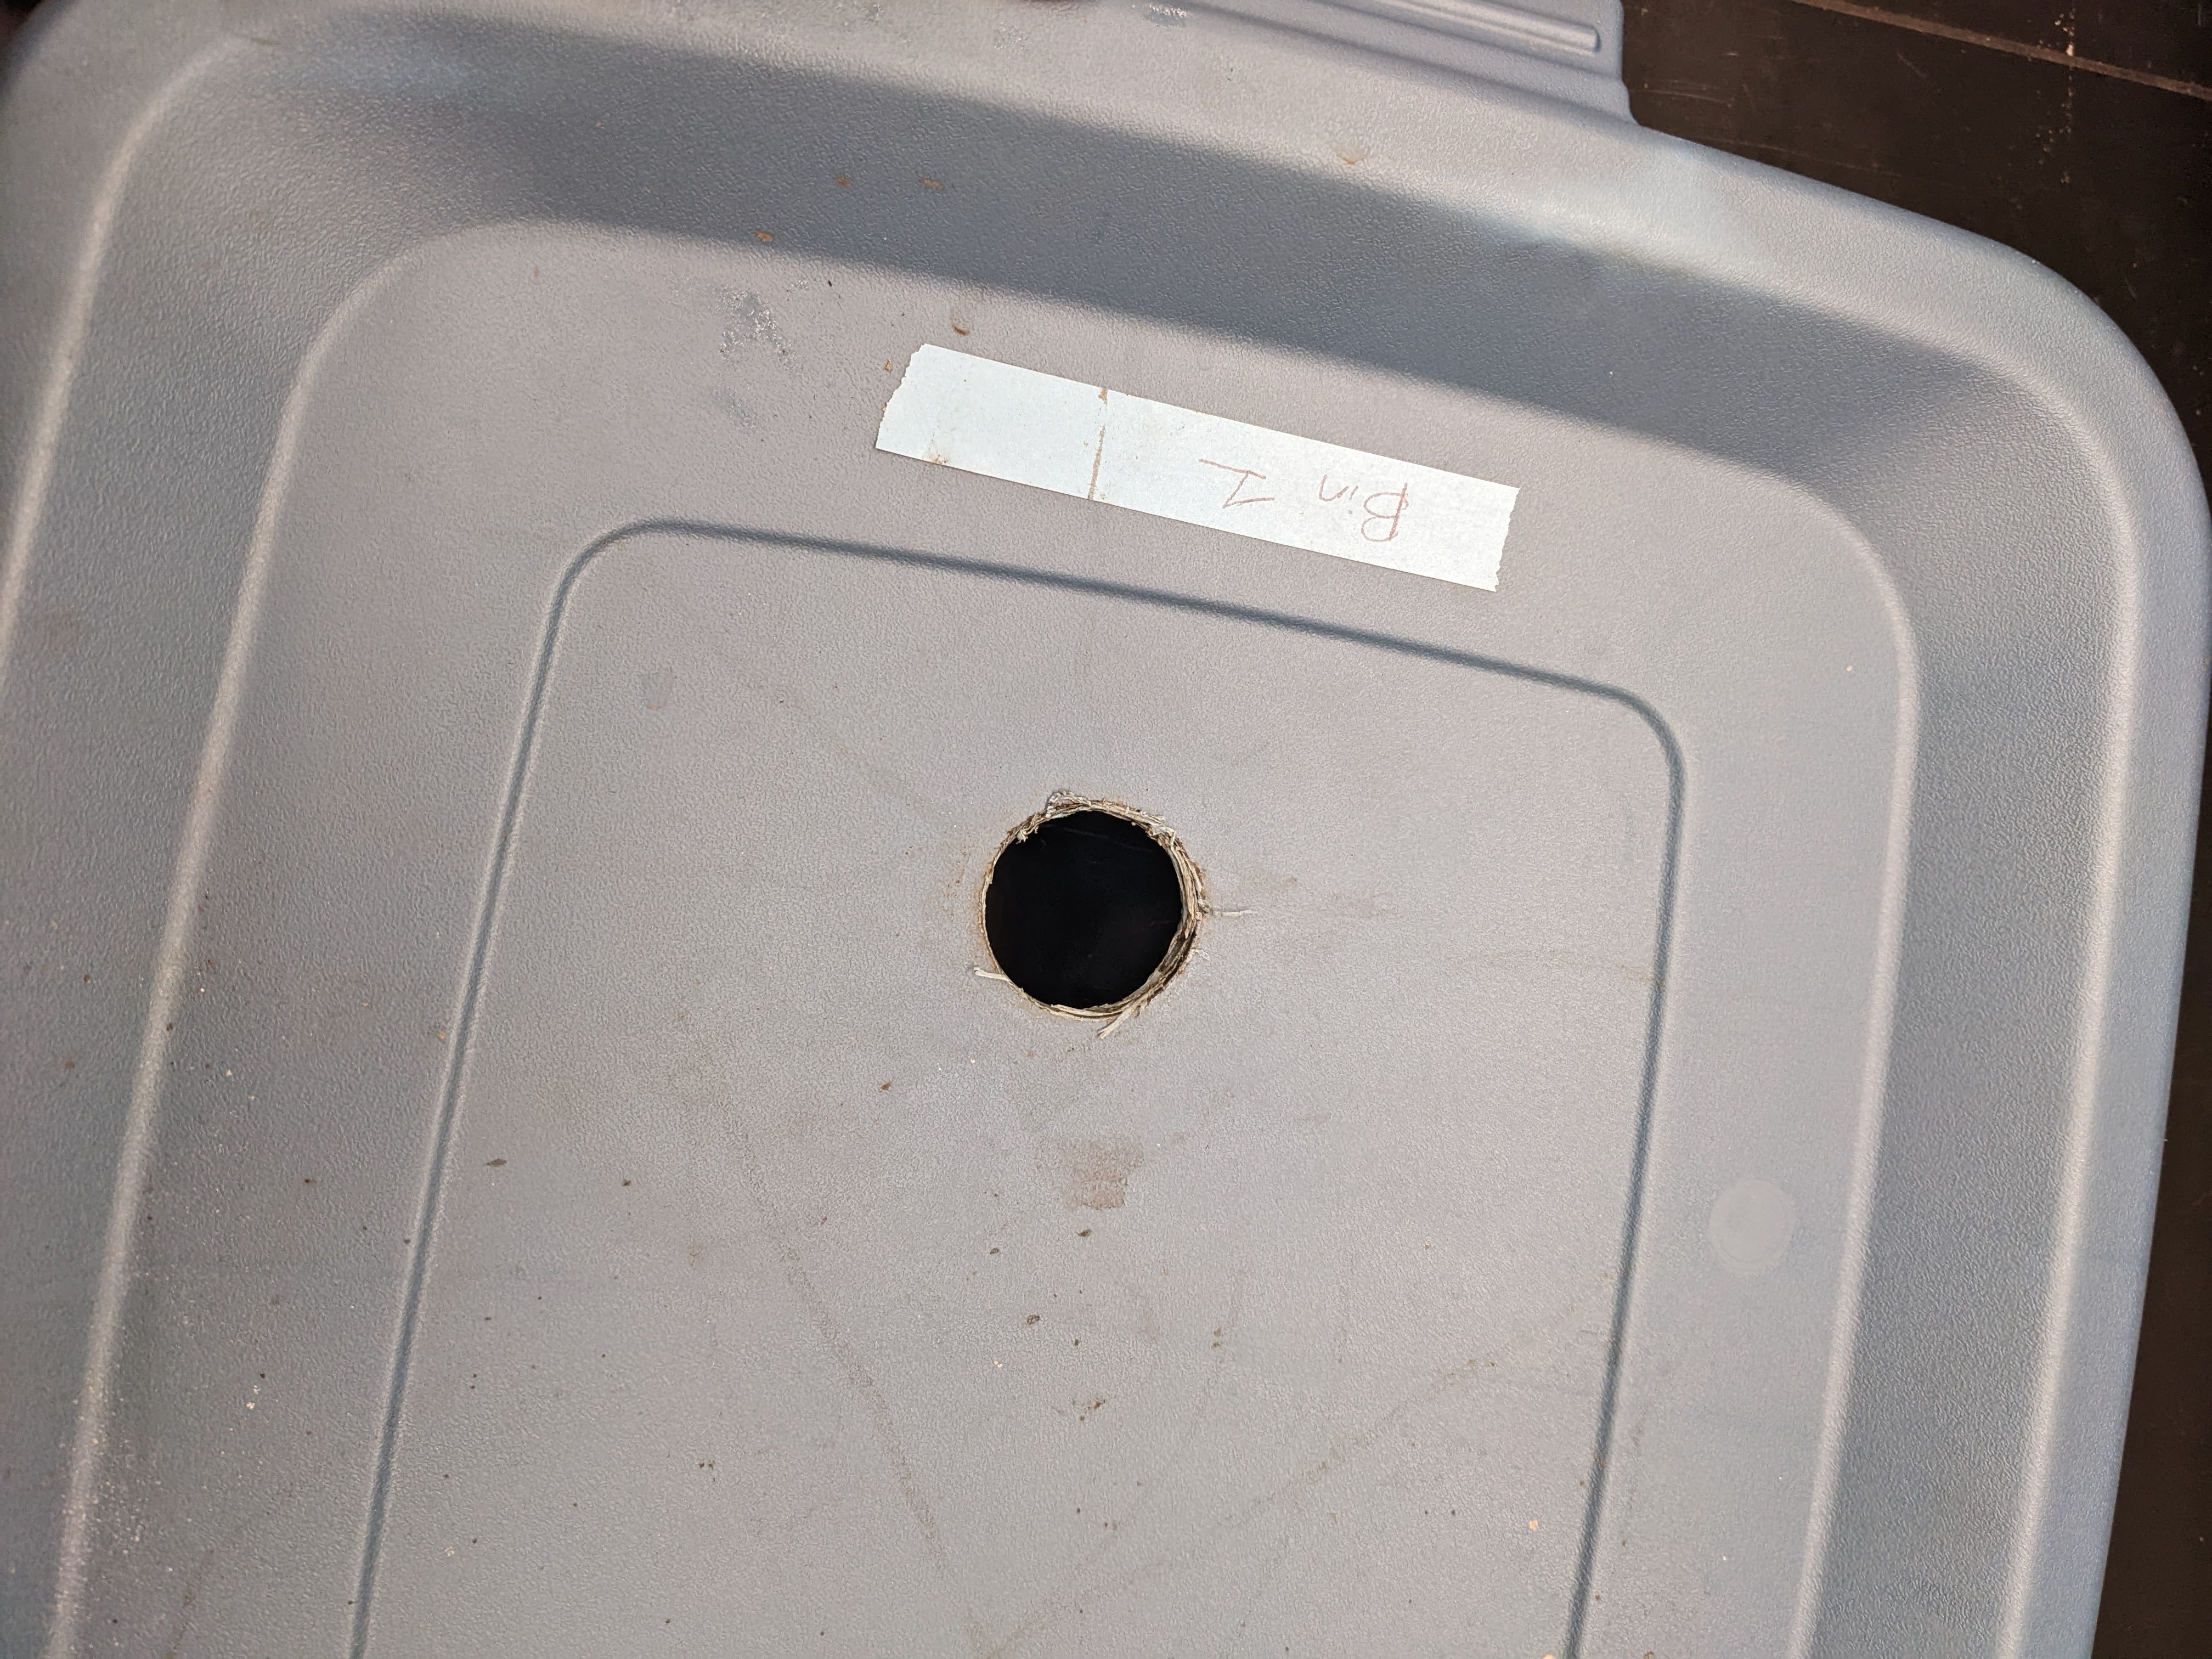 Figure 7. Top view of 18-gallon BSF larval rearing bin showing 1-inch circular opening for Tee PVC joint insertion. (<em>Photo credit: Catherine Terrell, Purdue Entomology</em>)